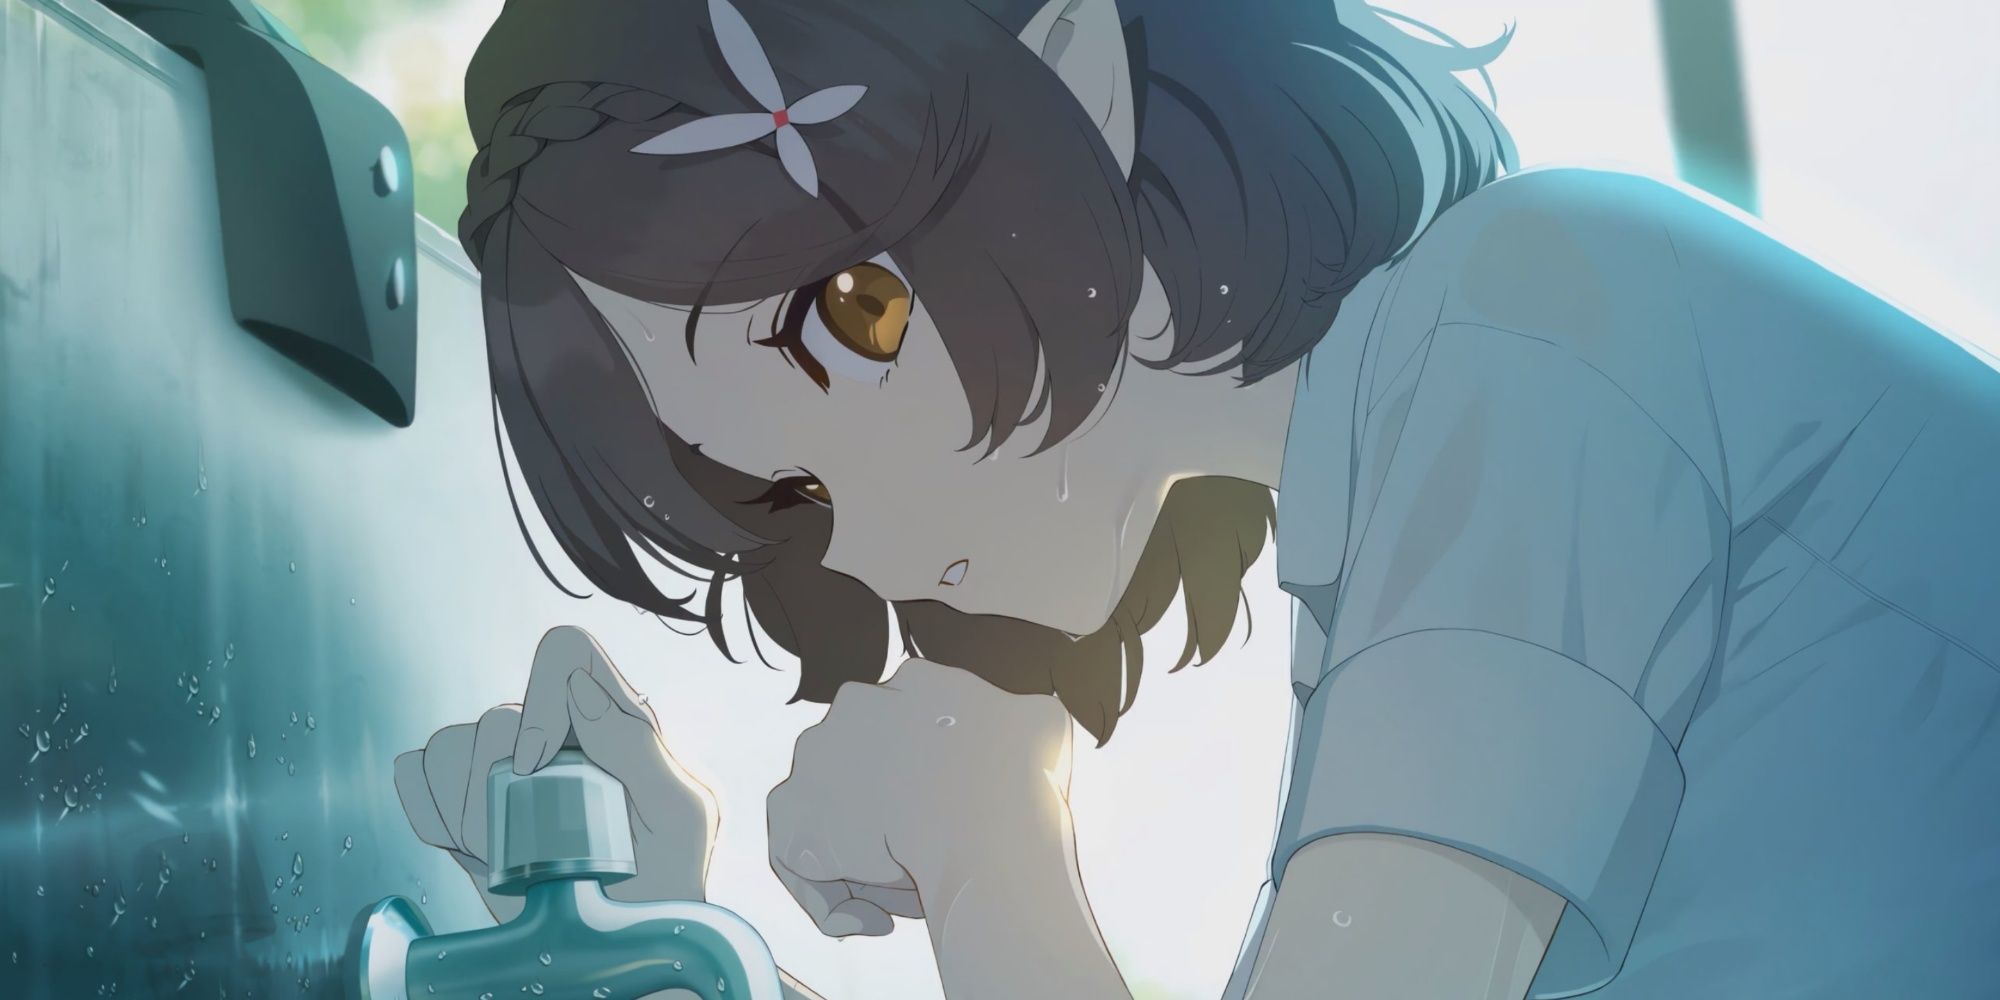 Okusora Ayane drinking water from tap without glasses